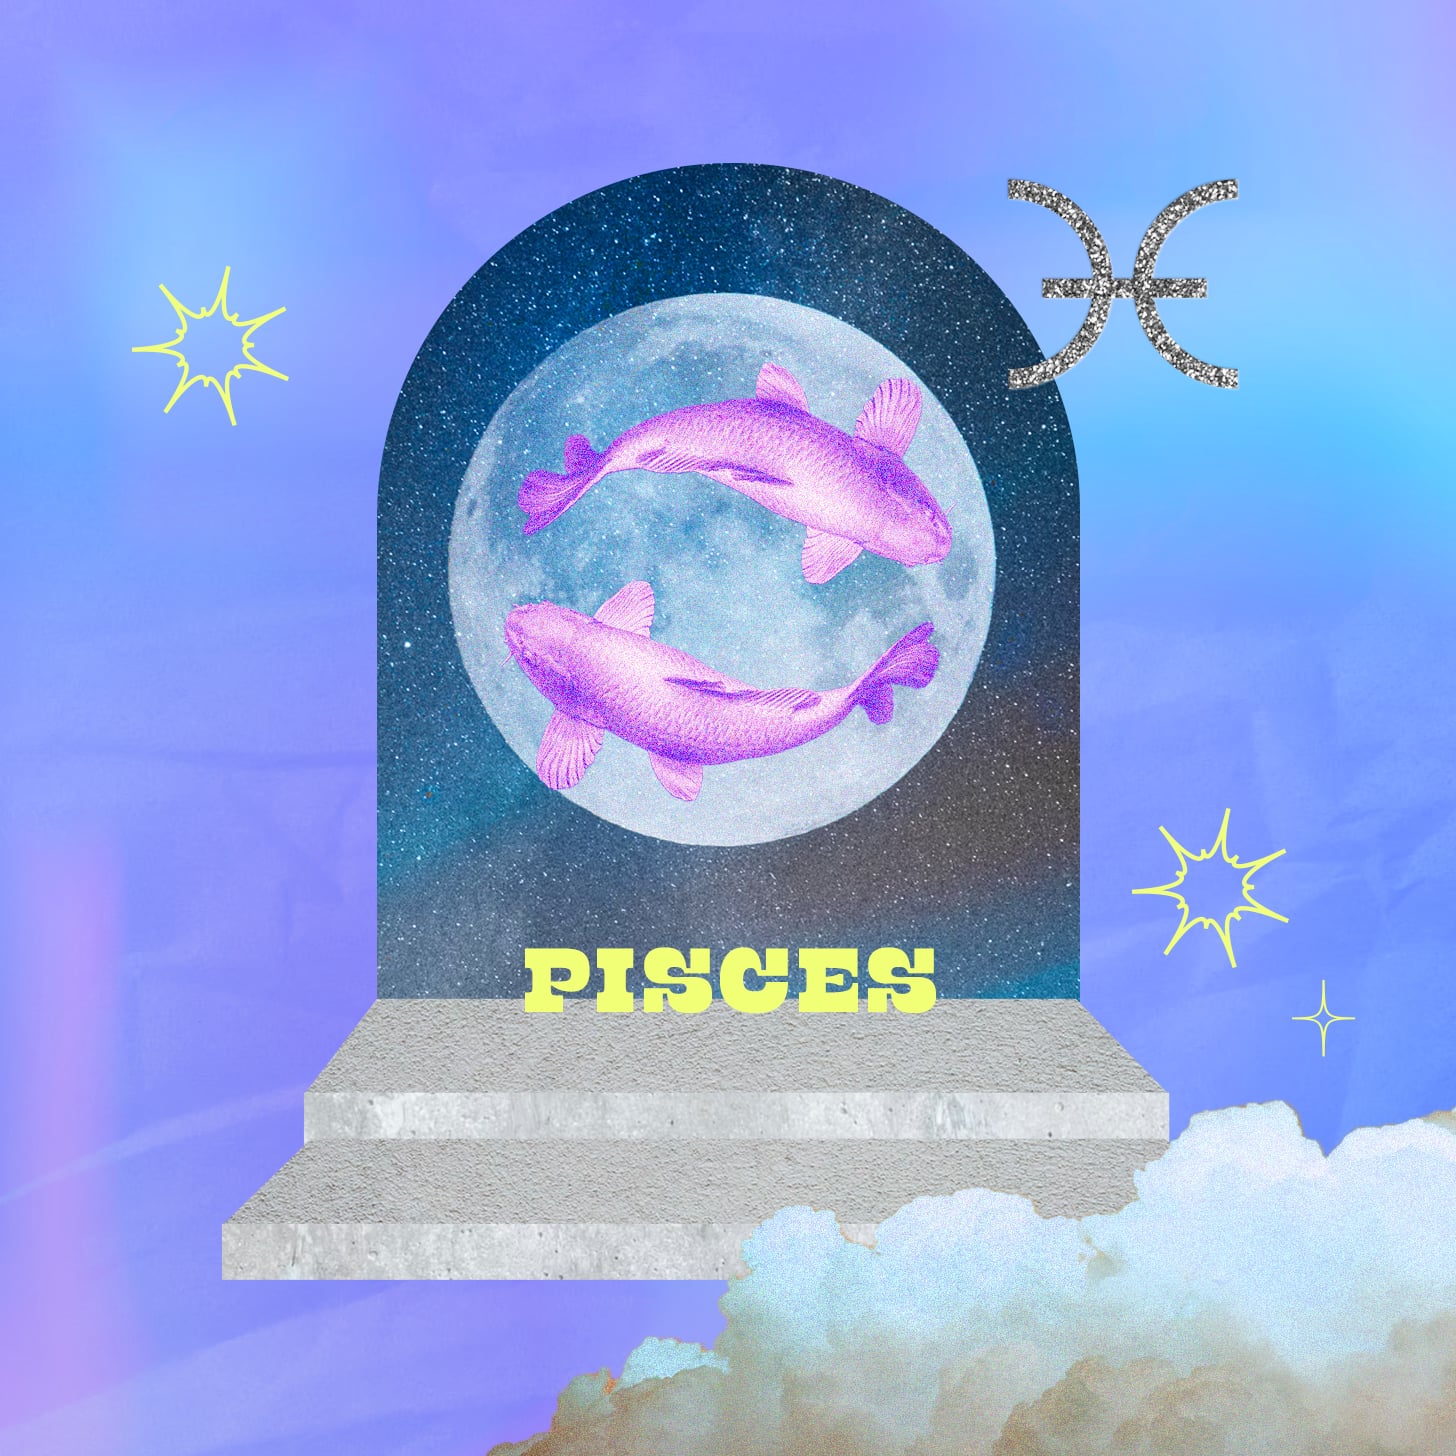 Pisces weekly horoscope for December 18, 2022 